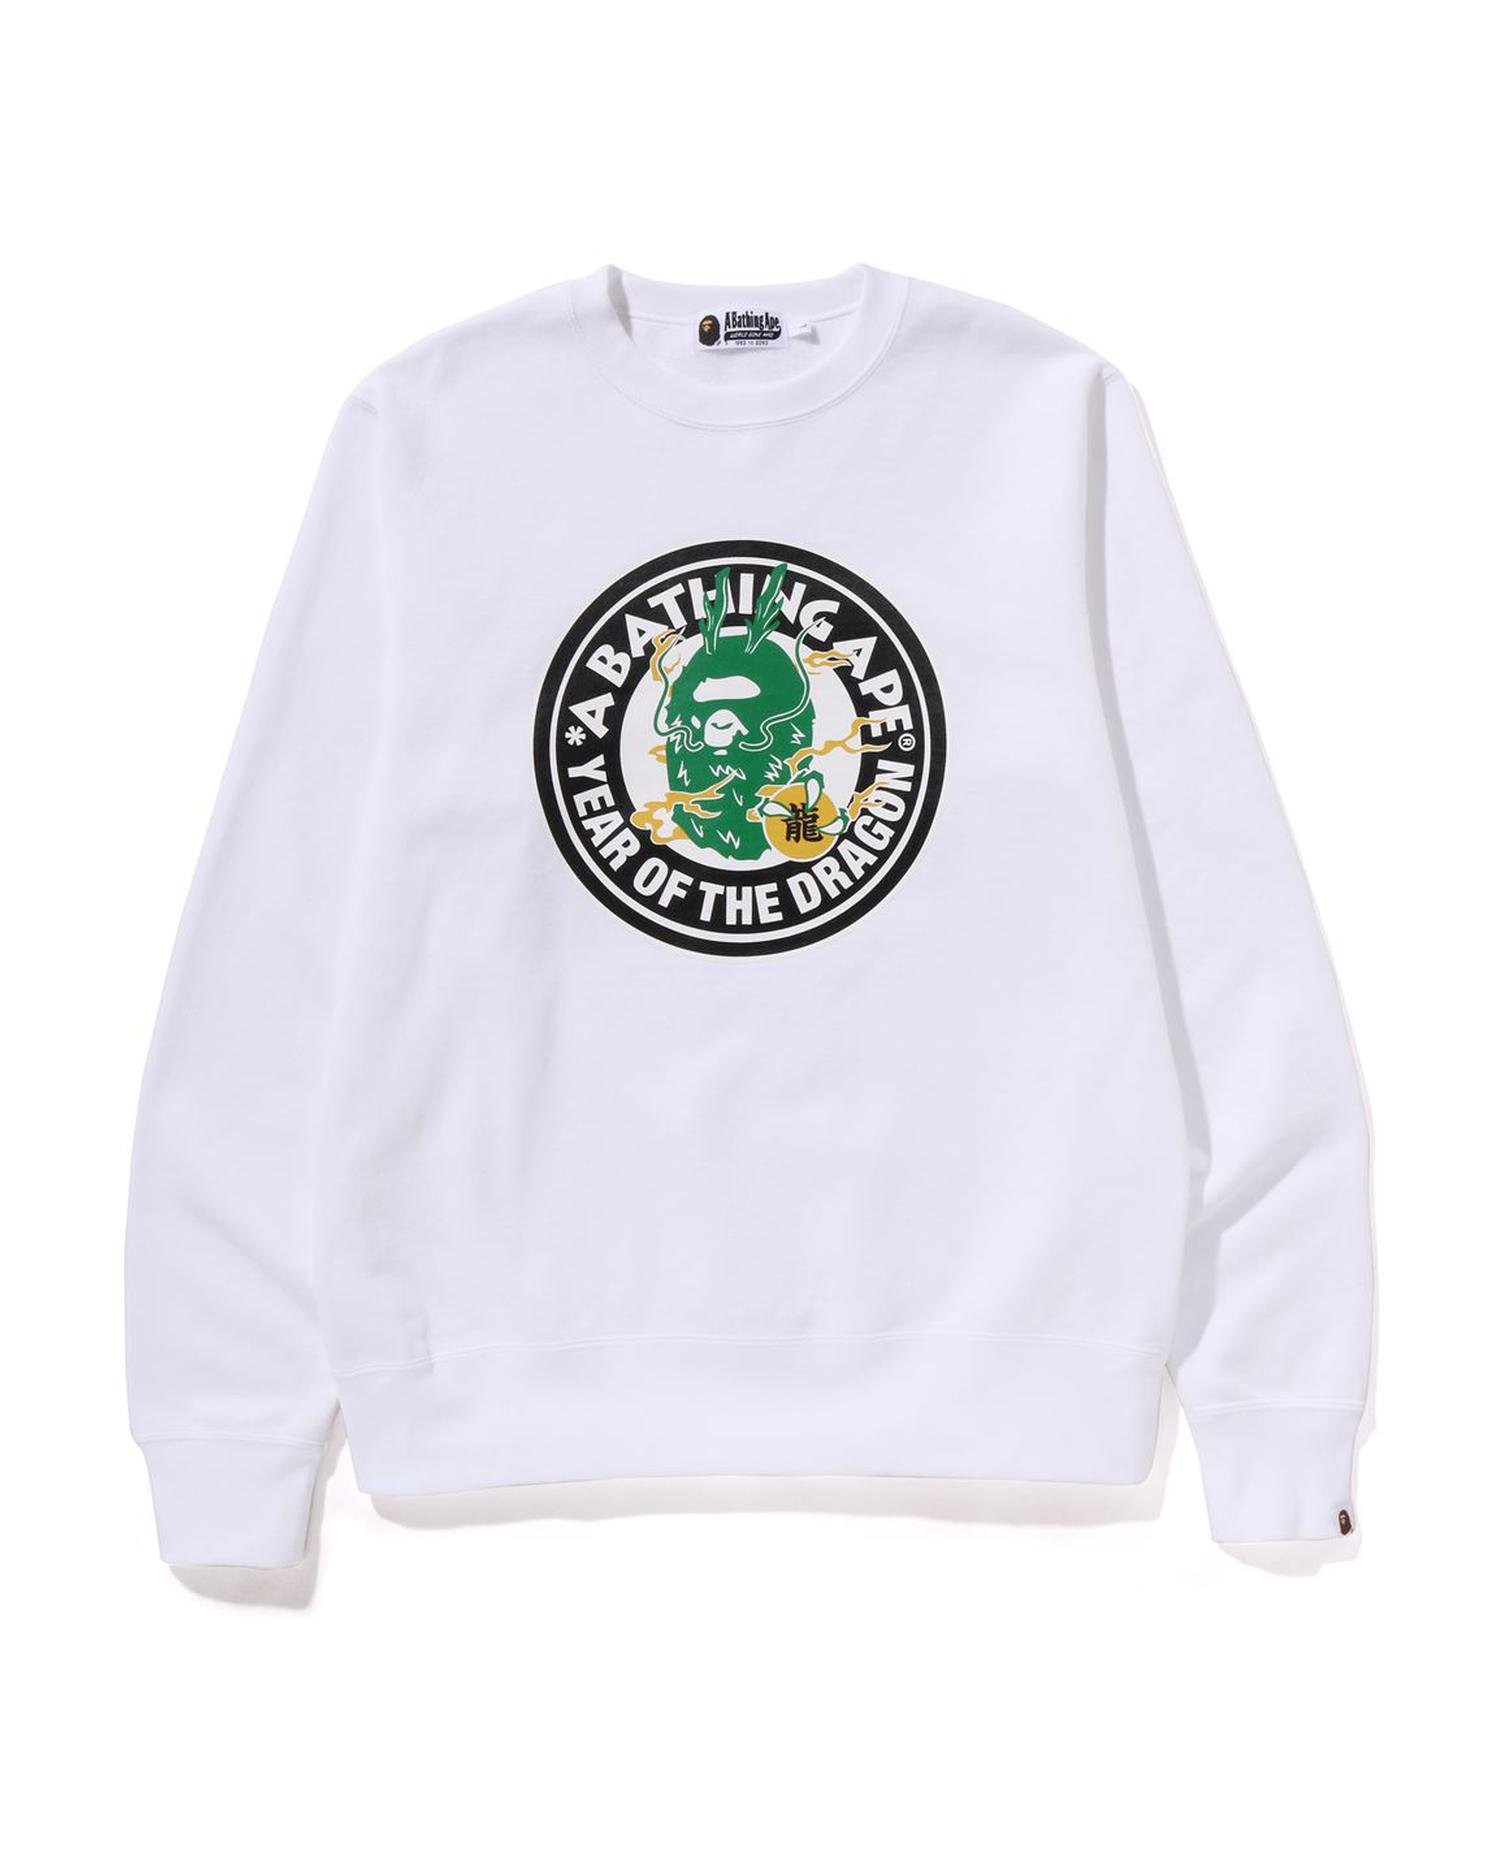 Year of the Dragon Crewneck by BAPE